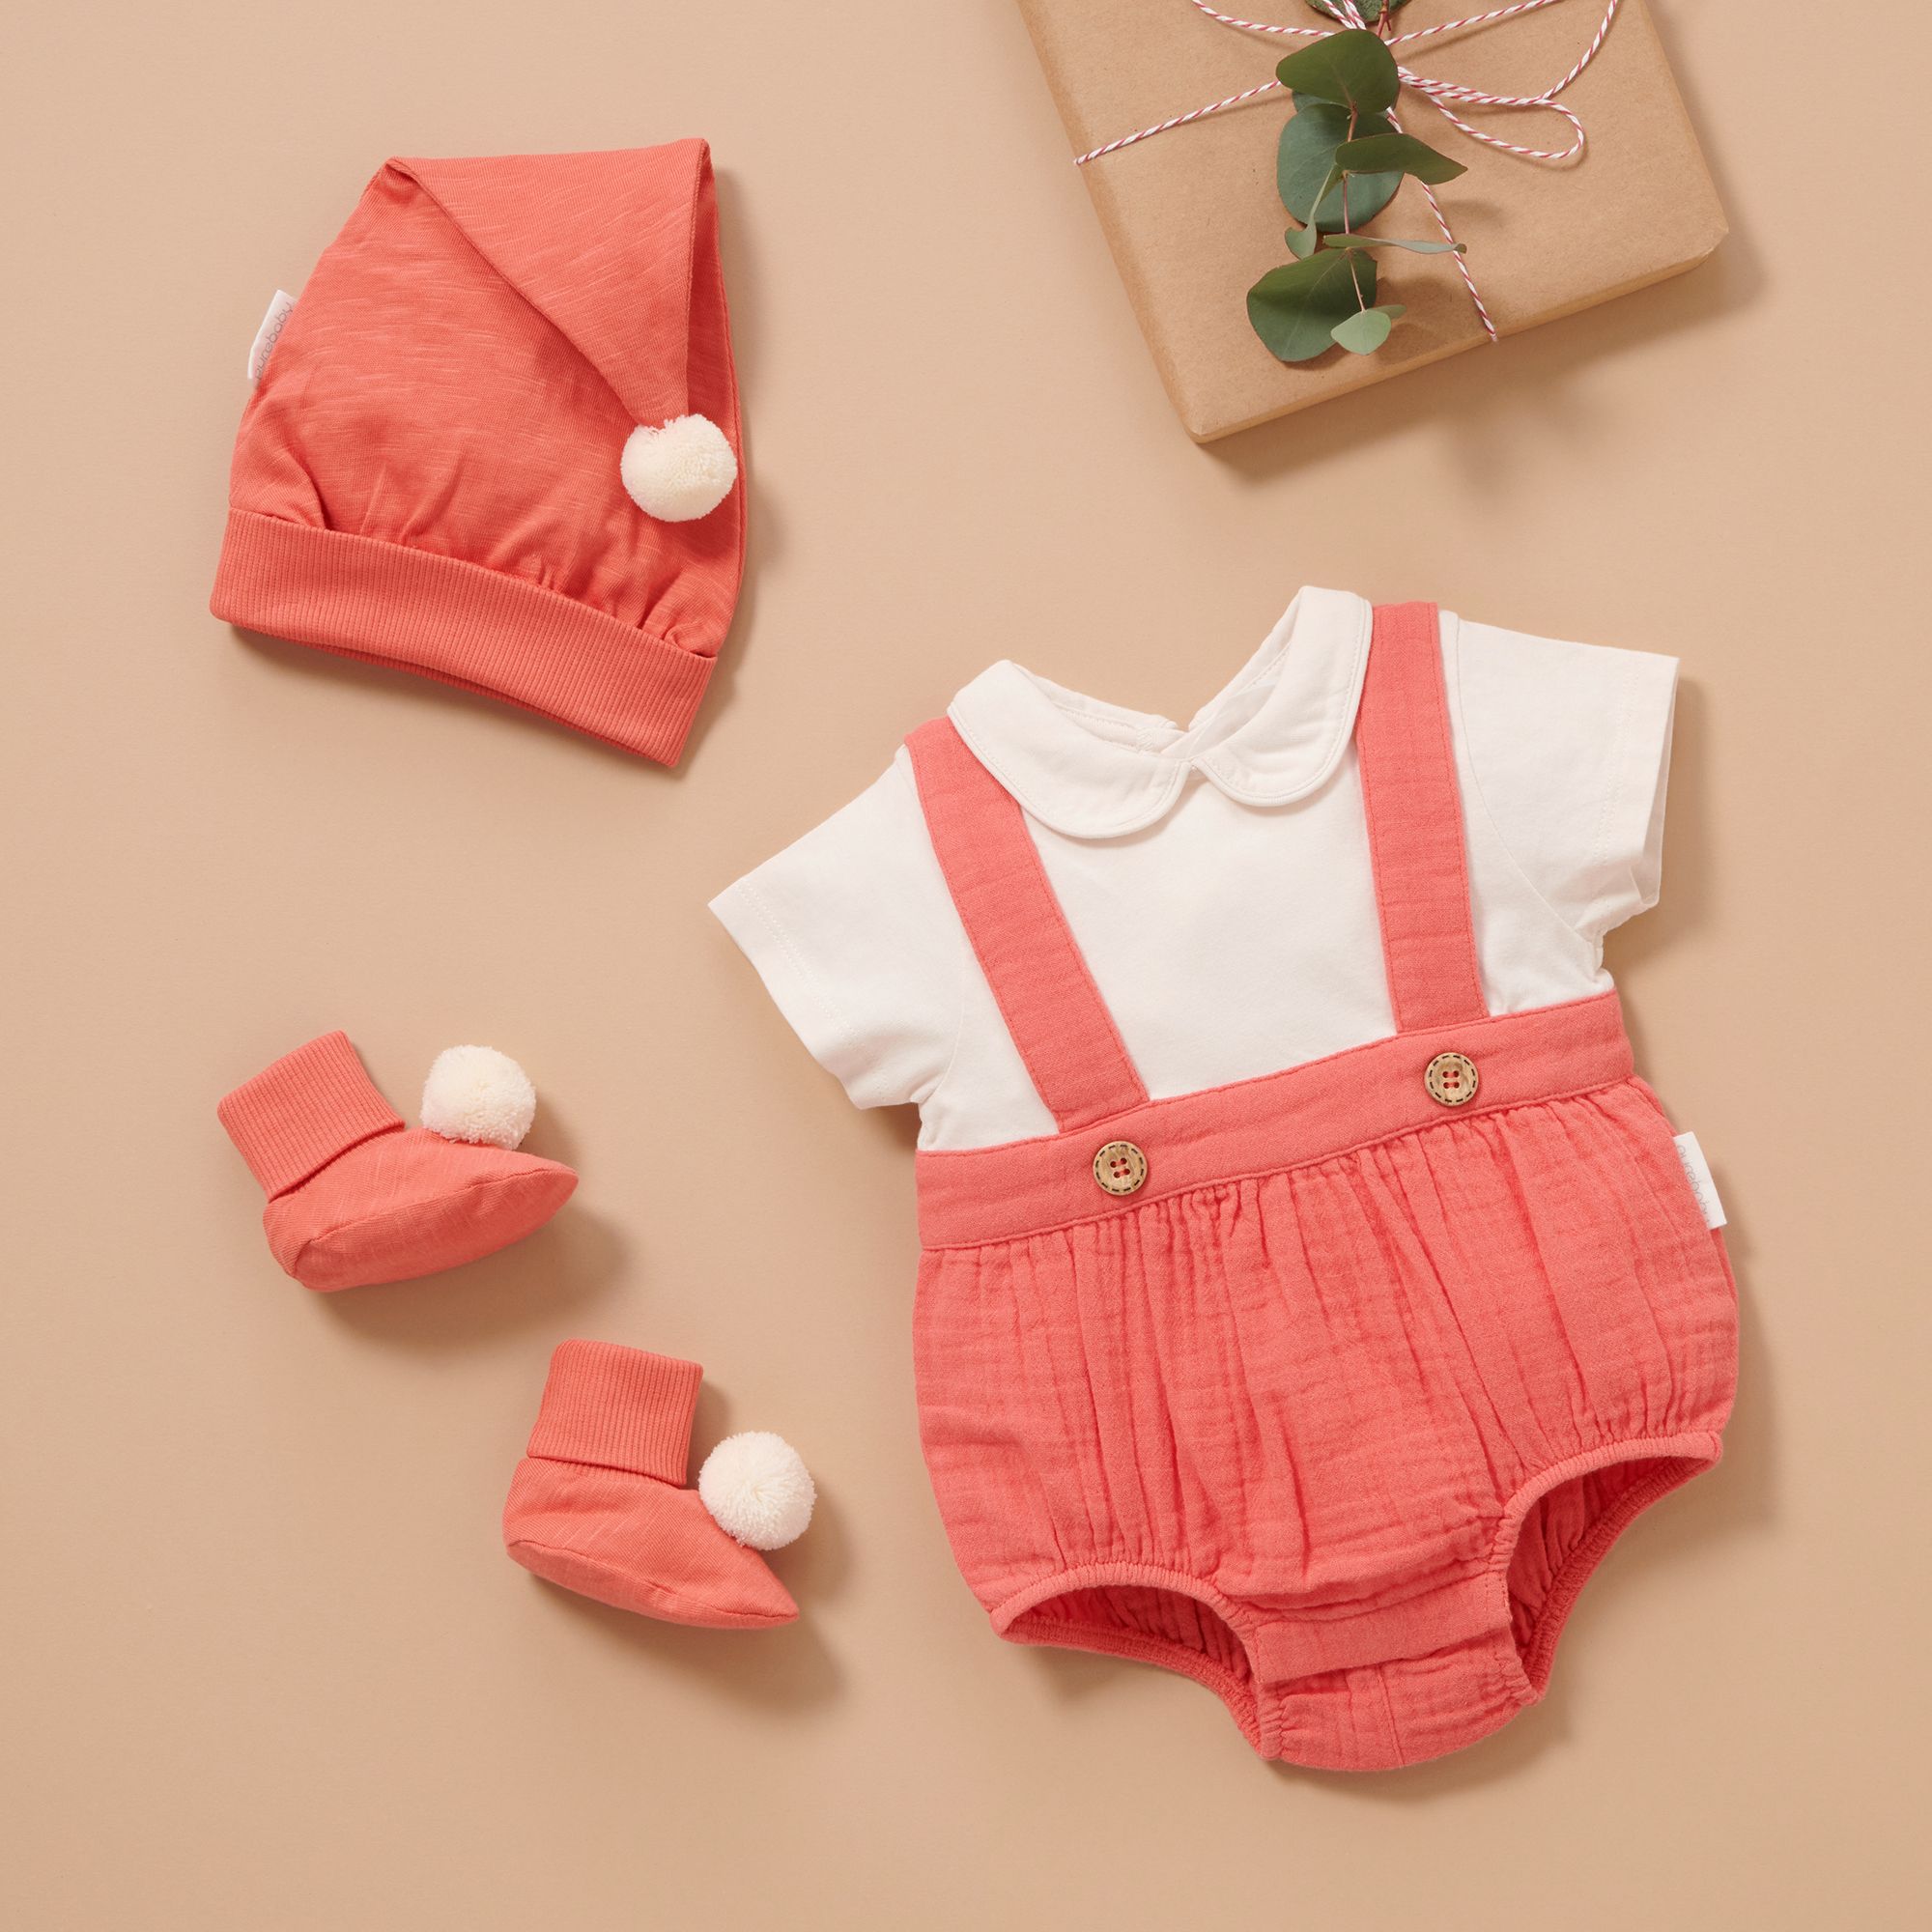 Baby Christmas outfit and accesories